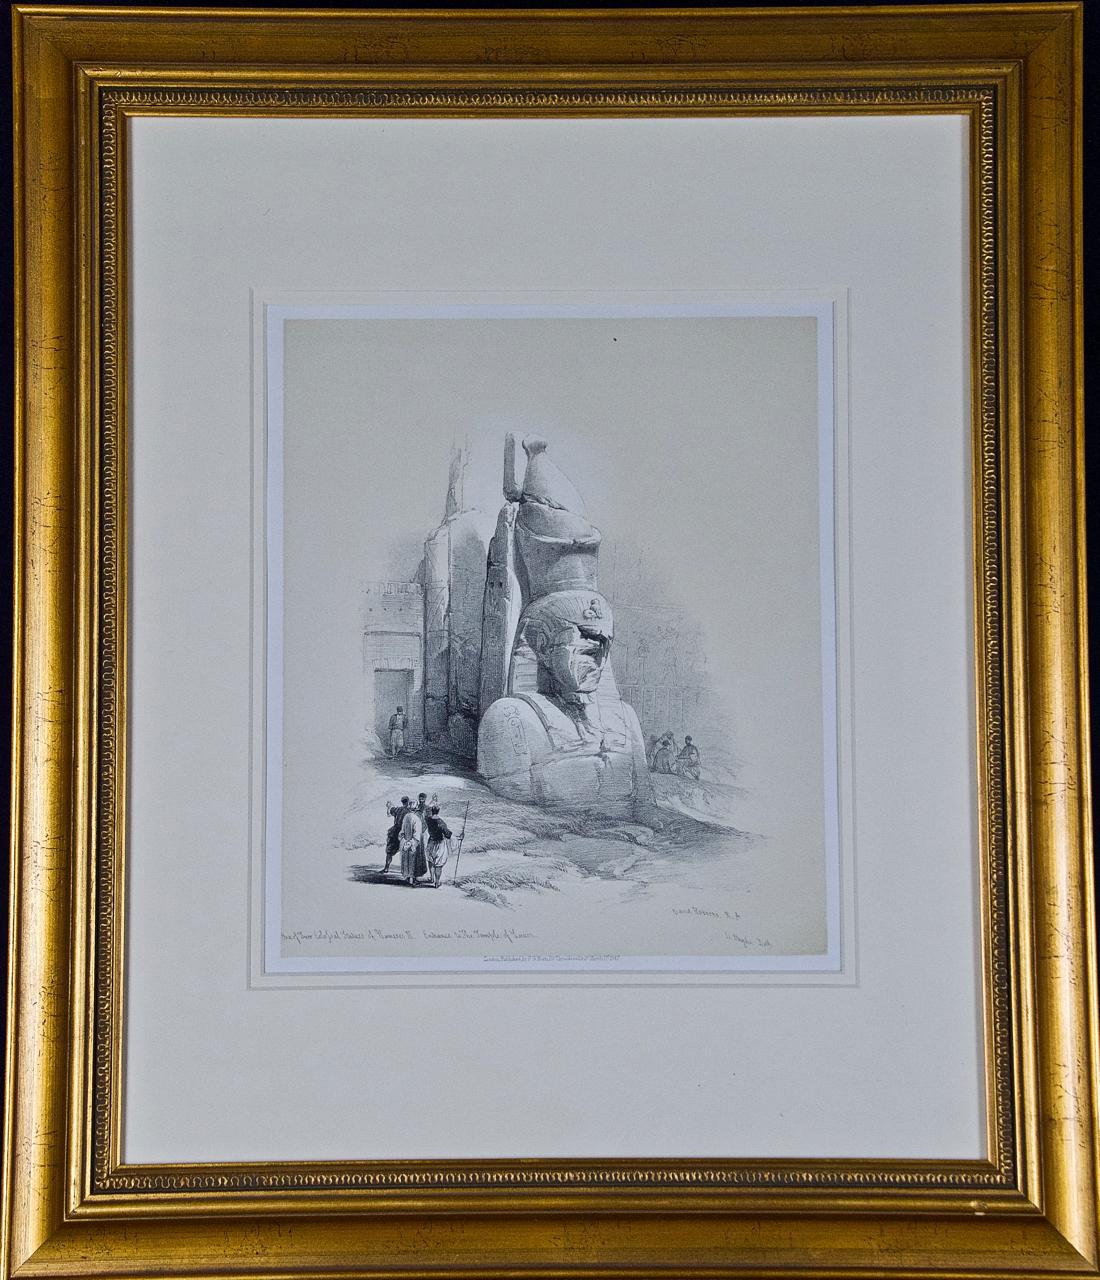 Colossal Statues of Ramses: David Roberts' 19th Century Hand Colored Lithograph